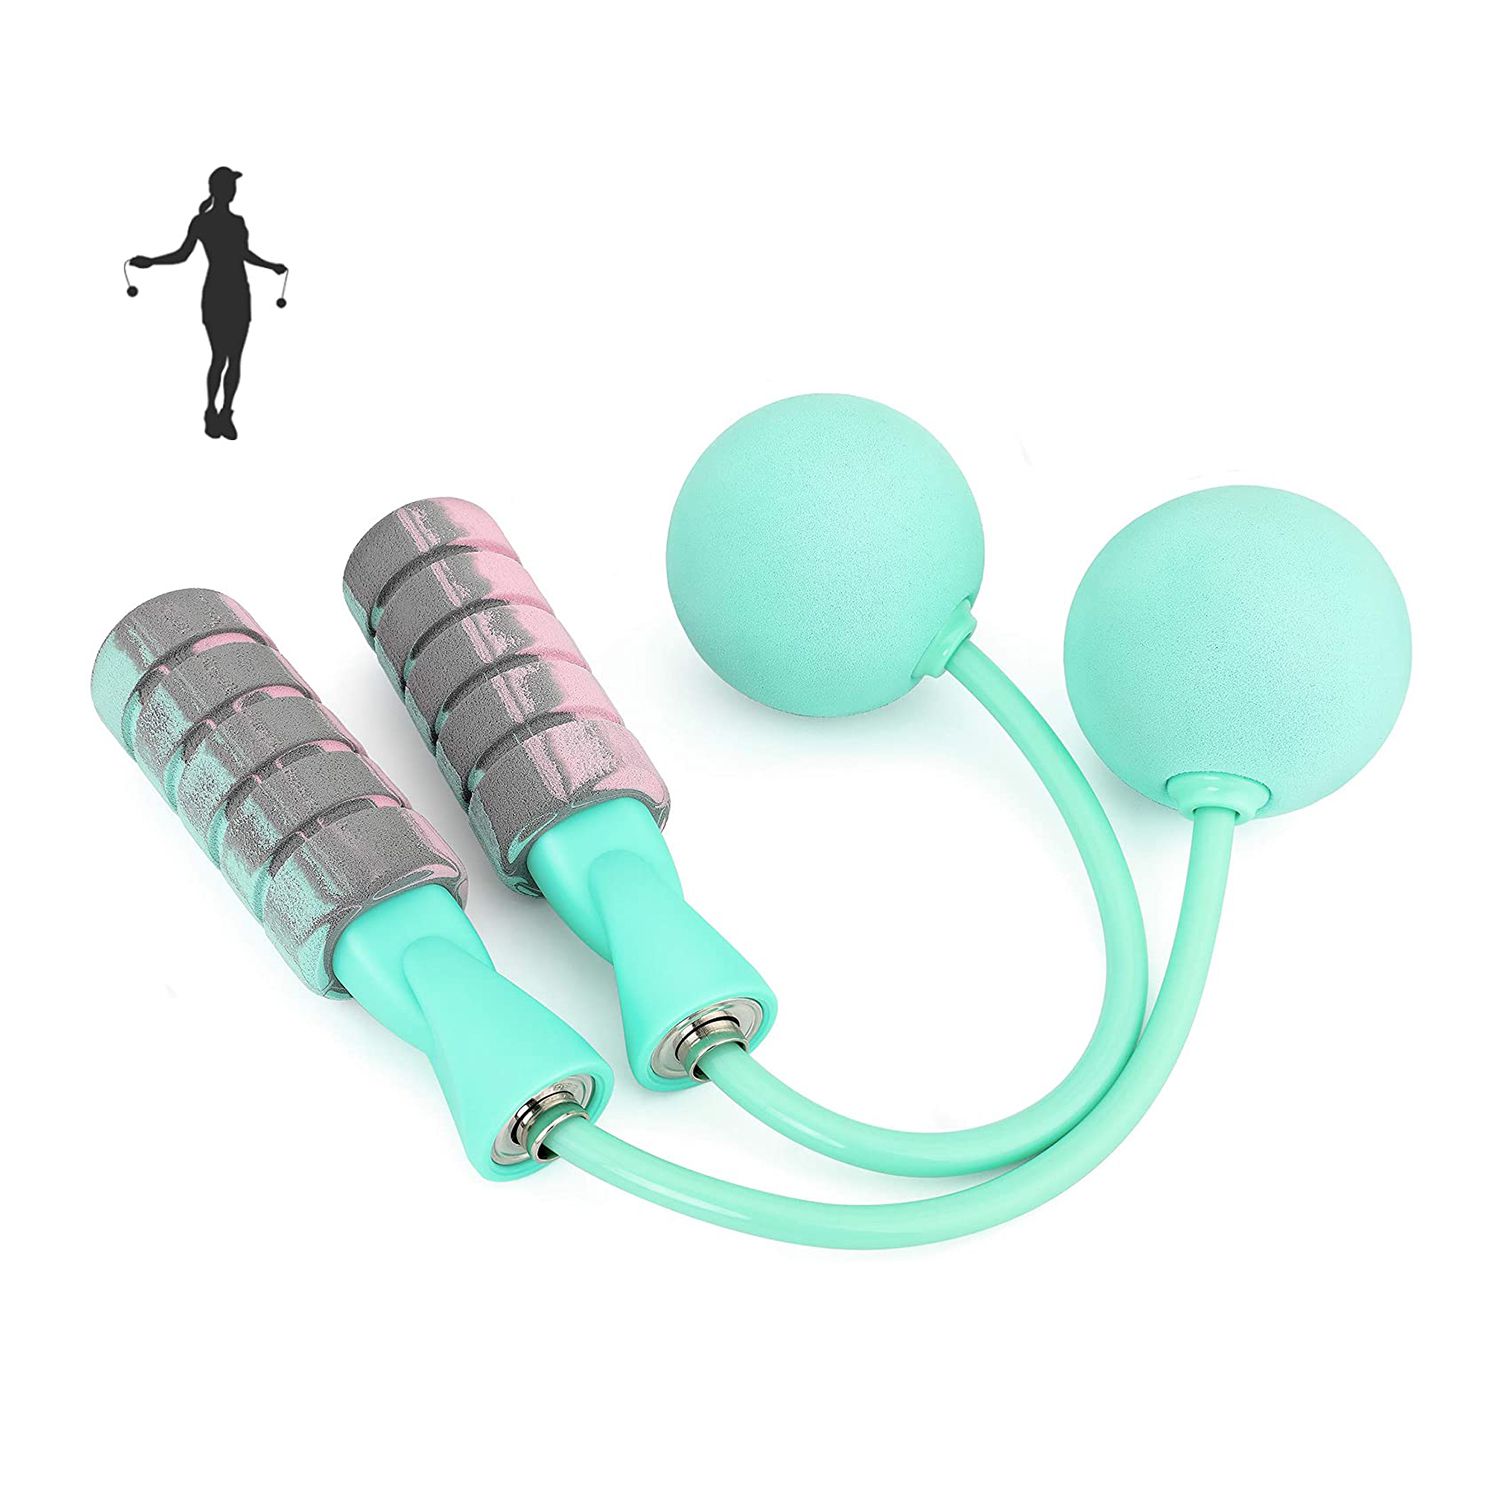 Adjustable Skipping Rope for Exercise Fitness Adjustable Weighted Jump Rope Workout for Men Women Kids FYY Jump Rope & Cordless Jump Rope